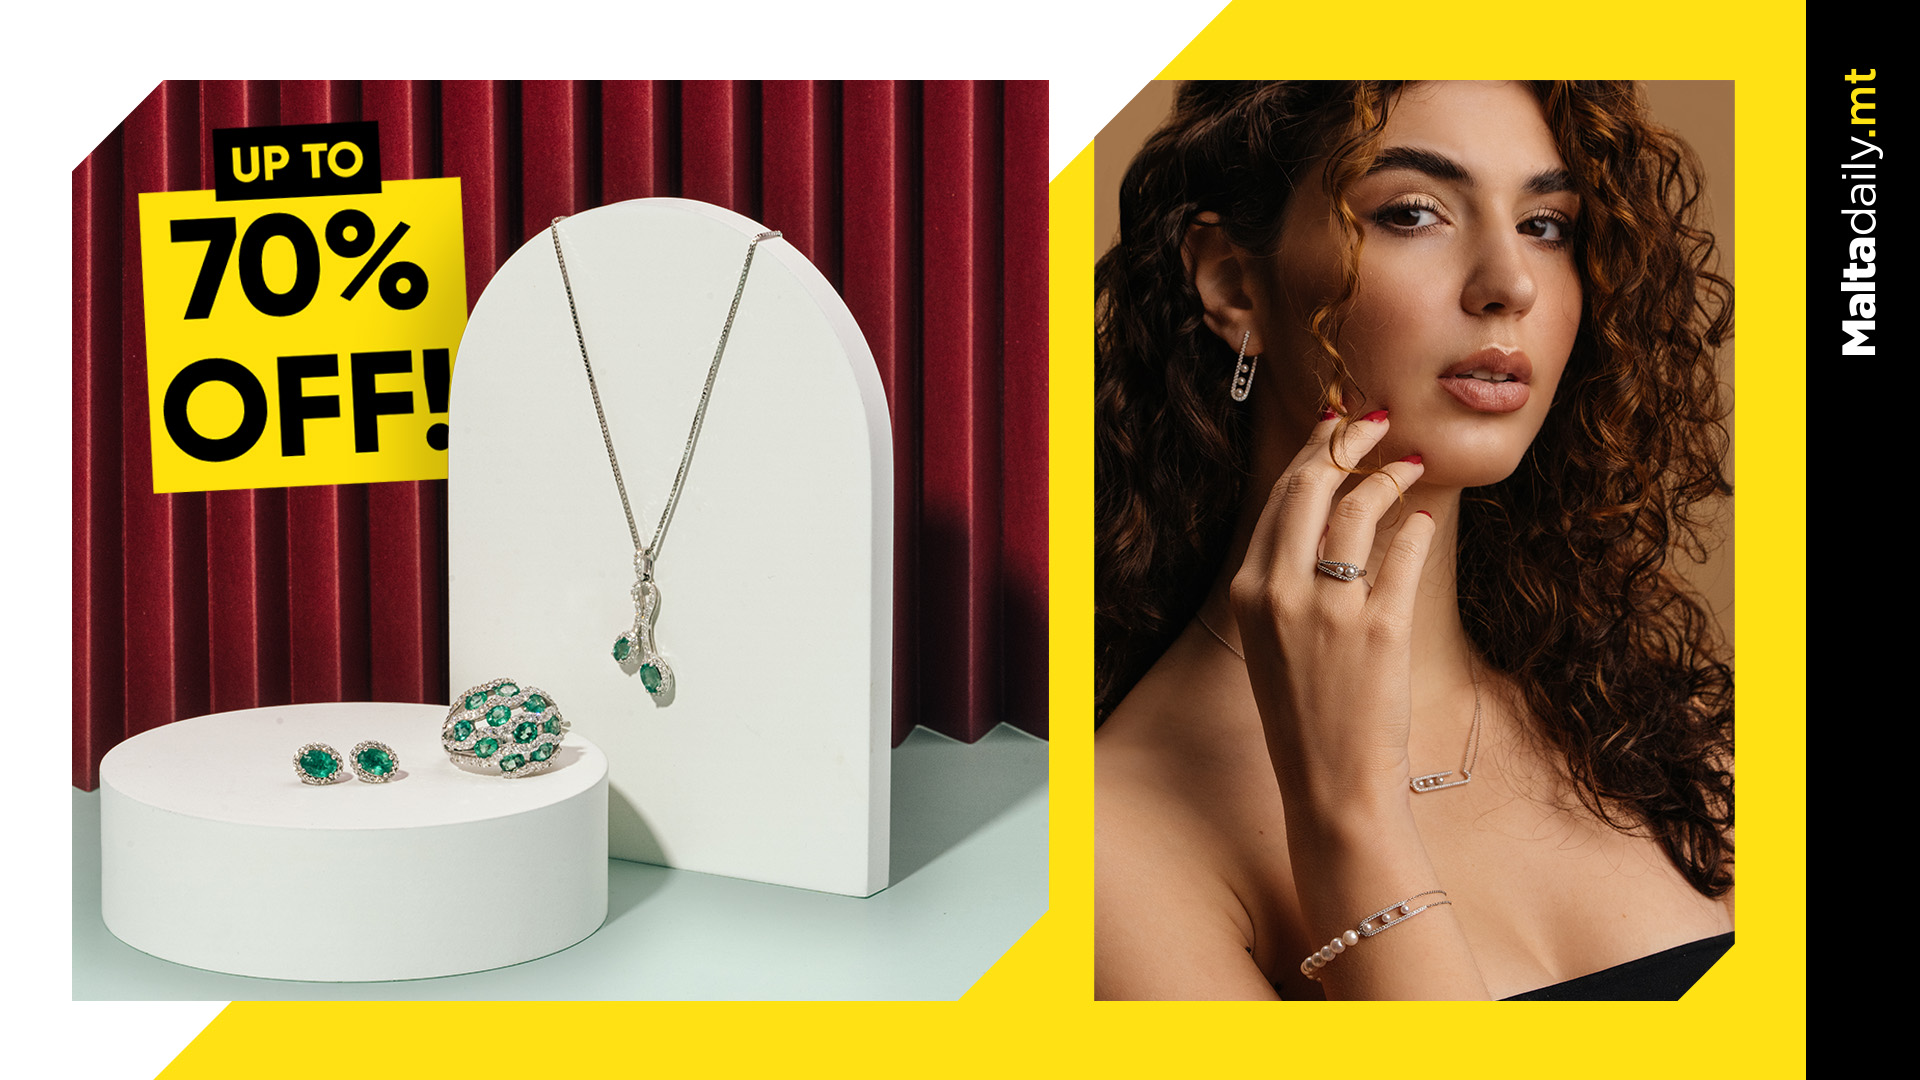 Vascas Jewellers Going Out With A Bang With Up To 70% Off Until End of July